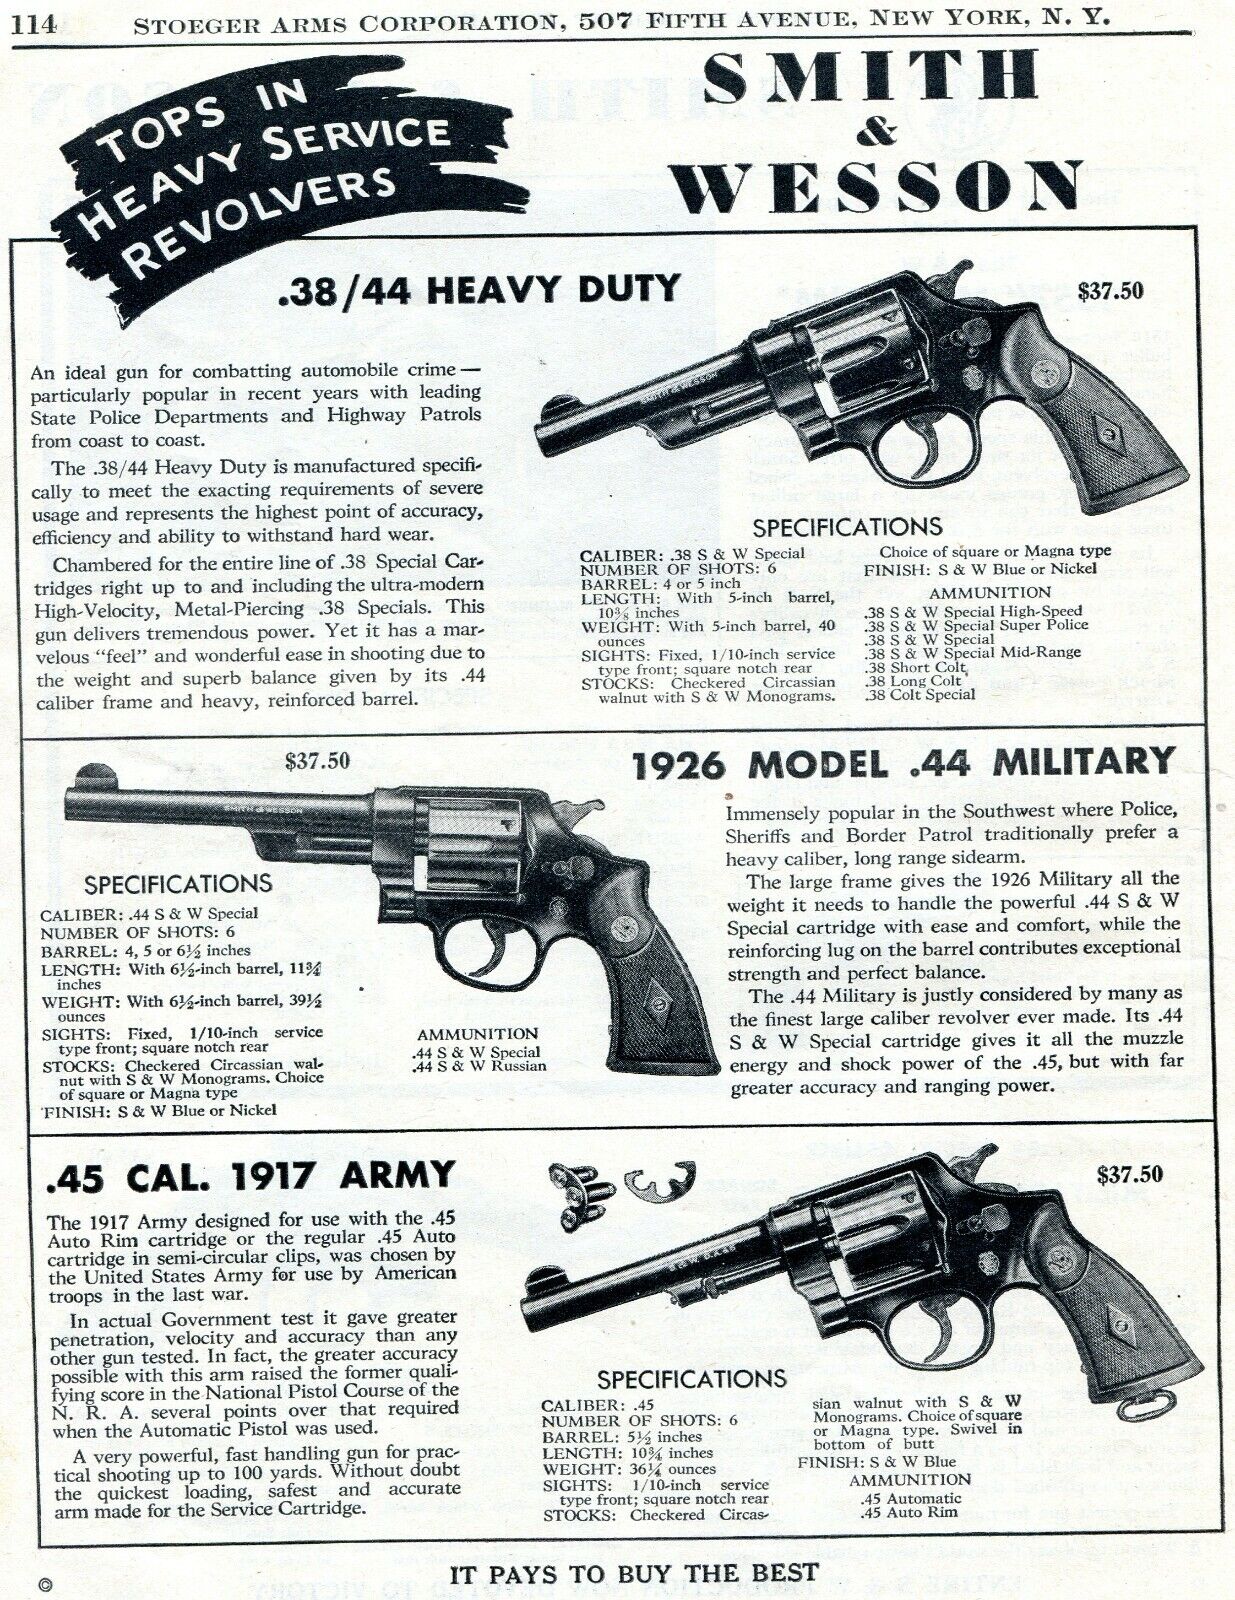 1946 Print Ad of Smith & Wesson S&W Revolver Heavy Duty, 1926 Military 1917 Army